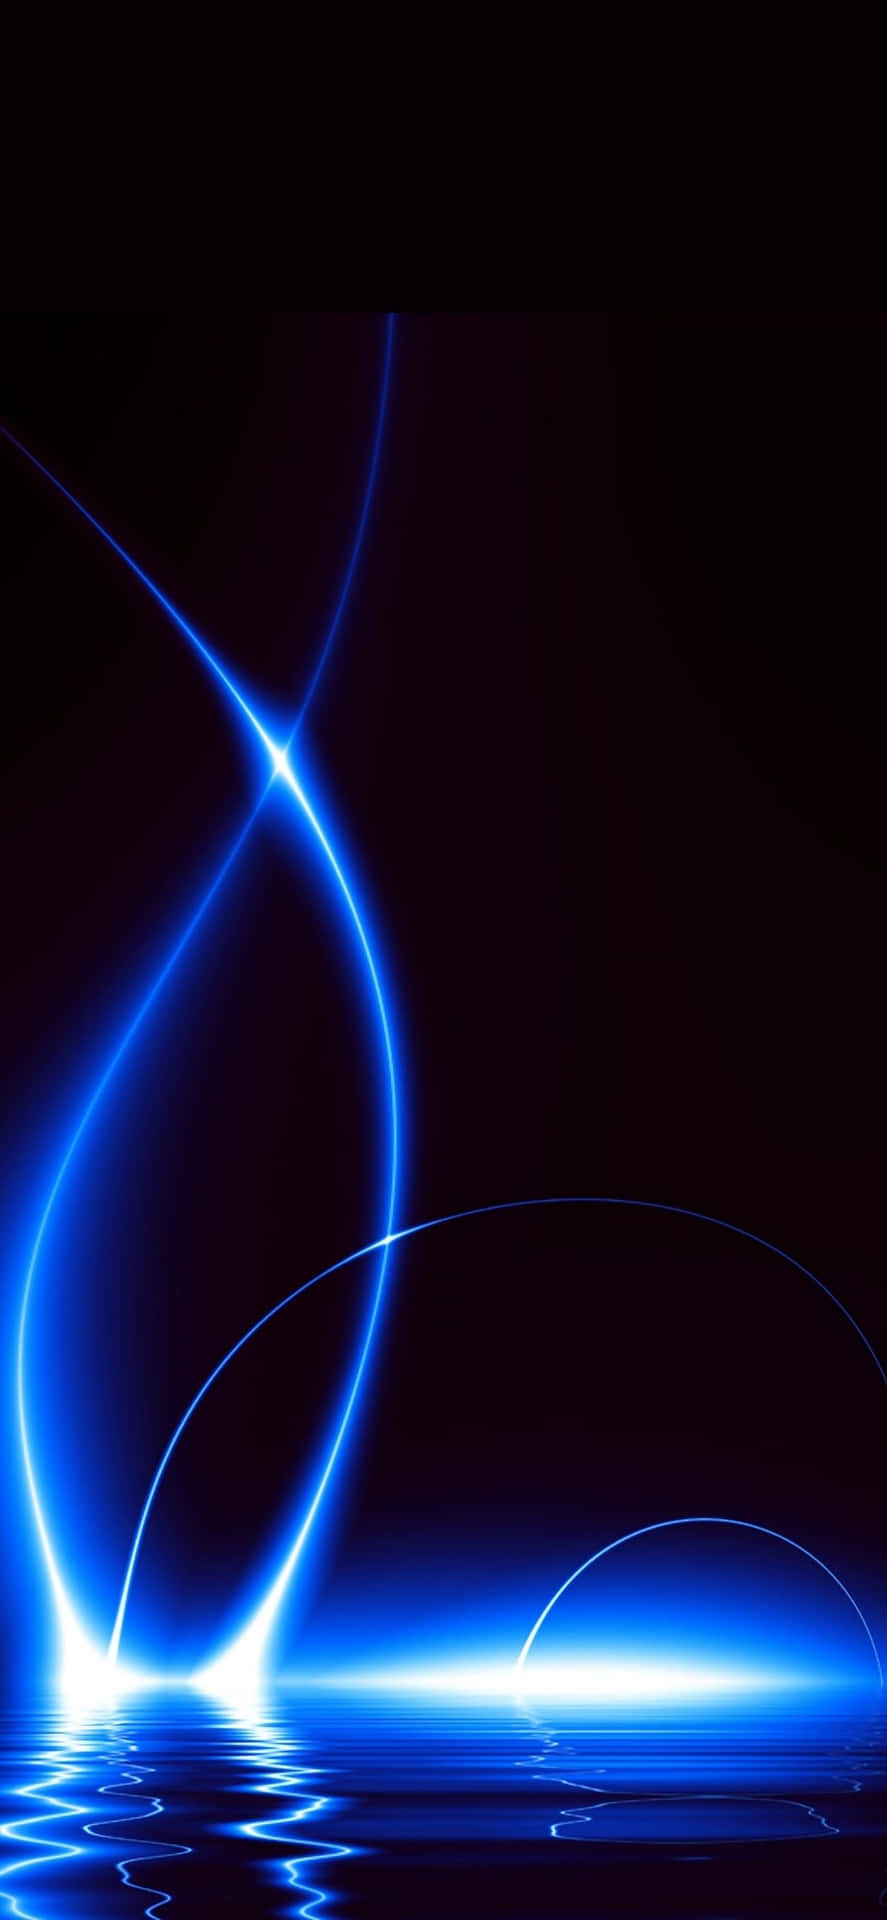 Lights Solid Blue Iphone Wallpaper